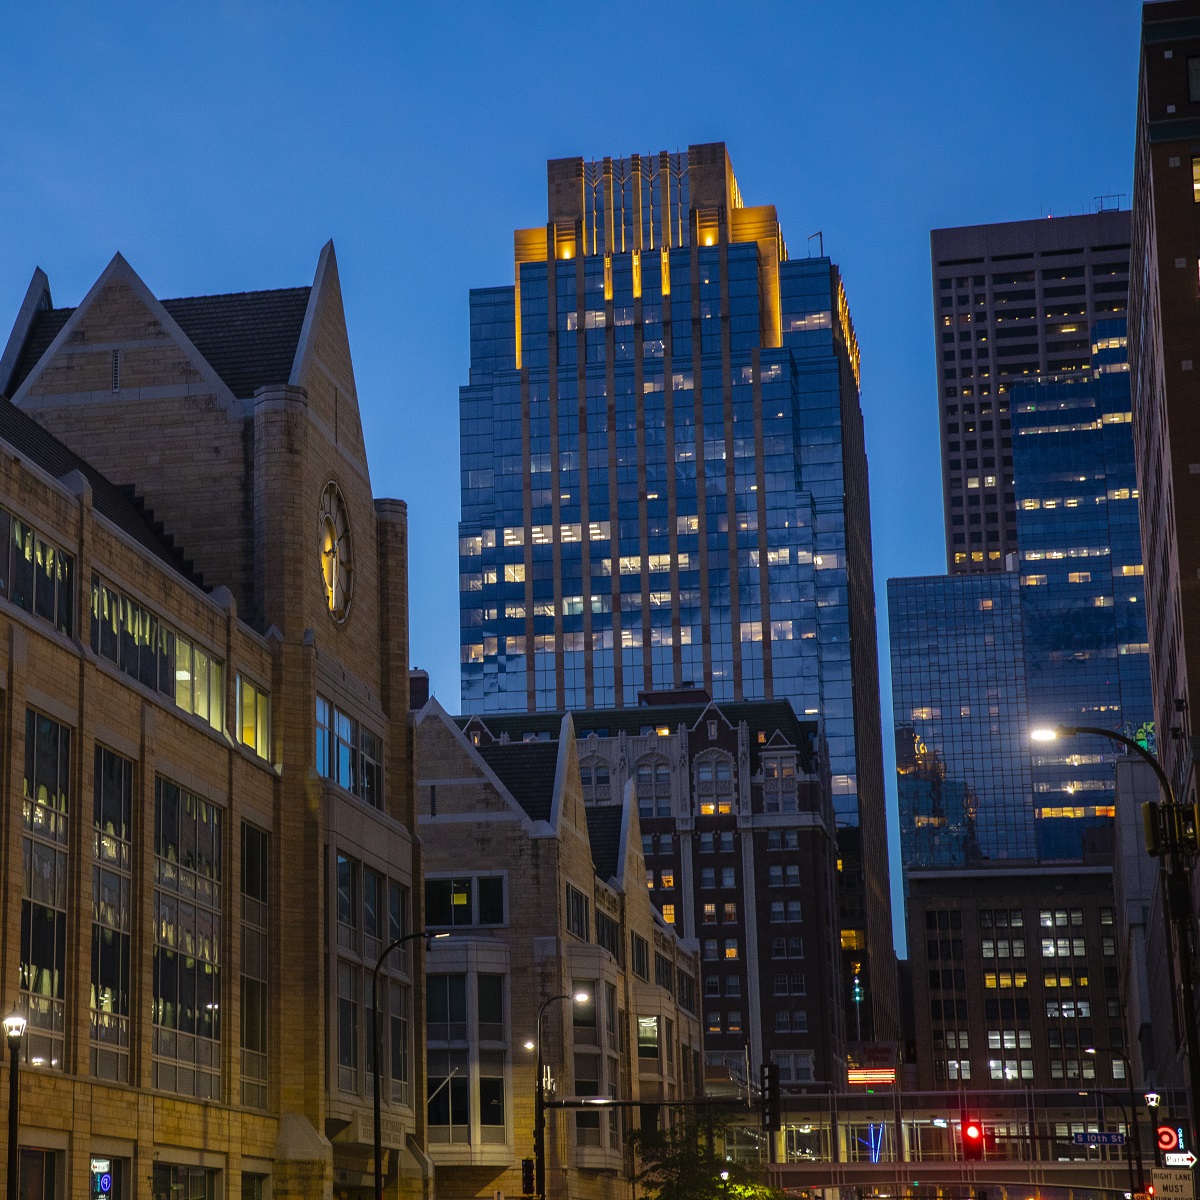 A nighttime photo of the exterior of the St. Thomas campus located in downtown Minneapolis.